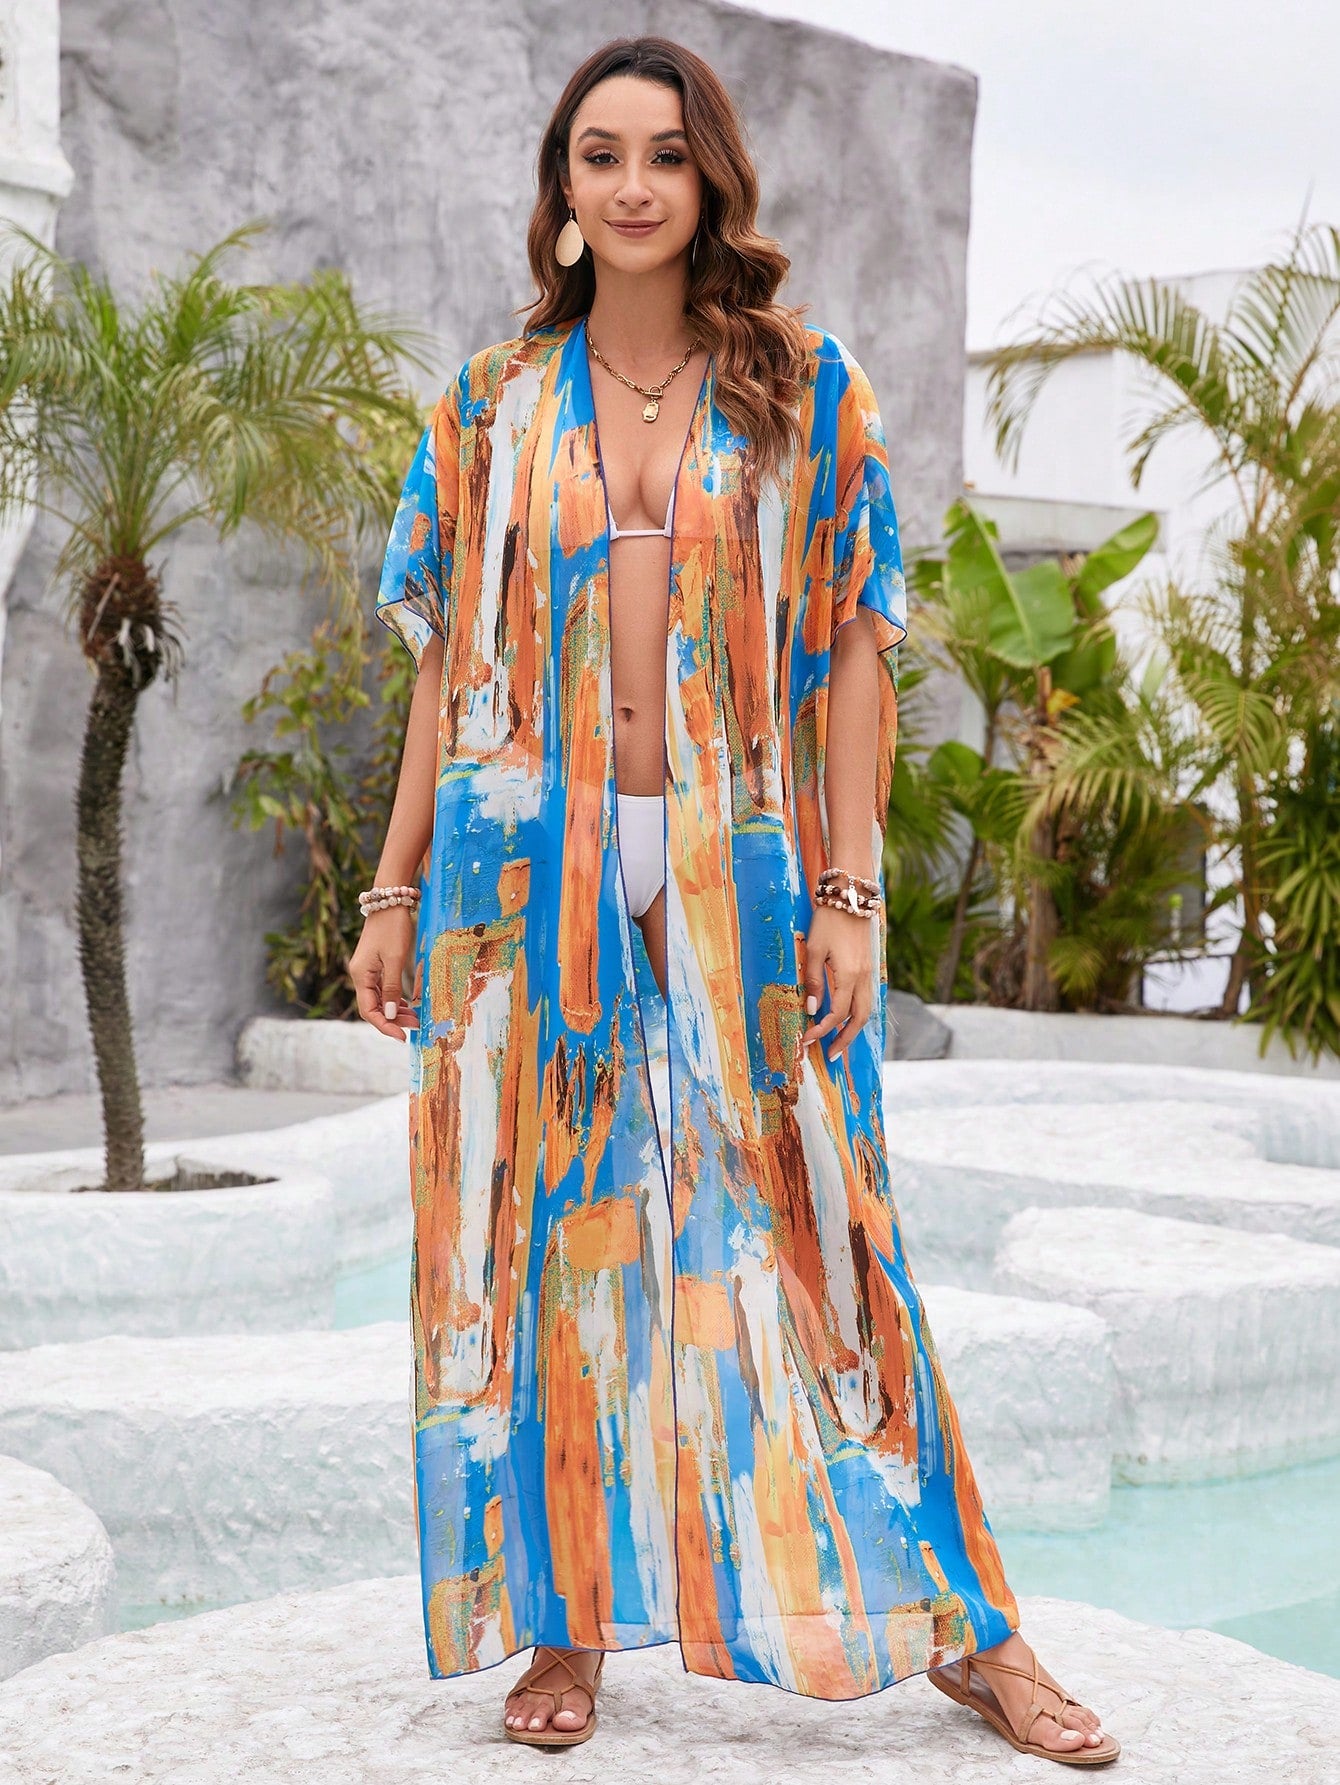 Women's Loose Fit Kimono Cover Up With Printed Pattern, Perfect For Casual Holiday Look